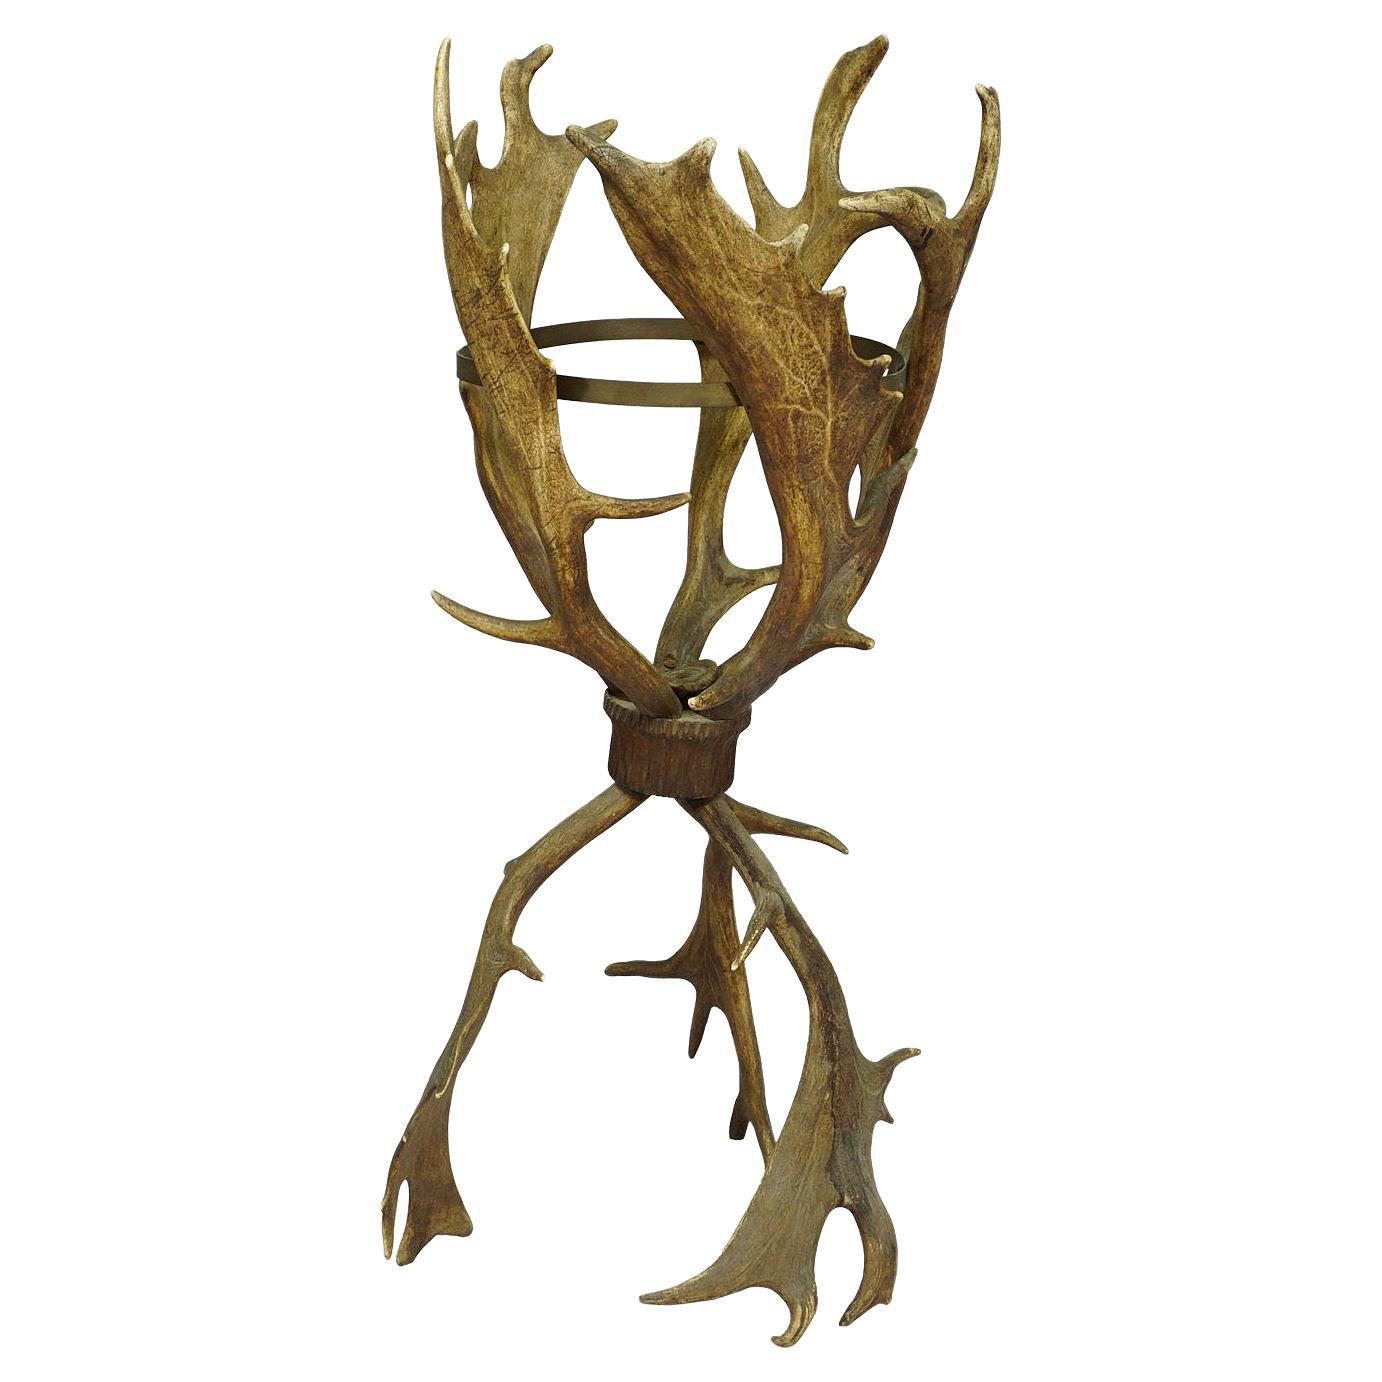 What are fallow deer antlers called?